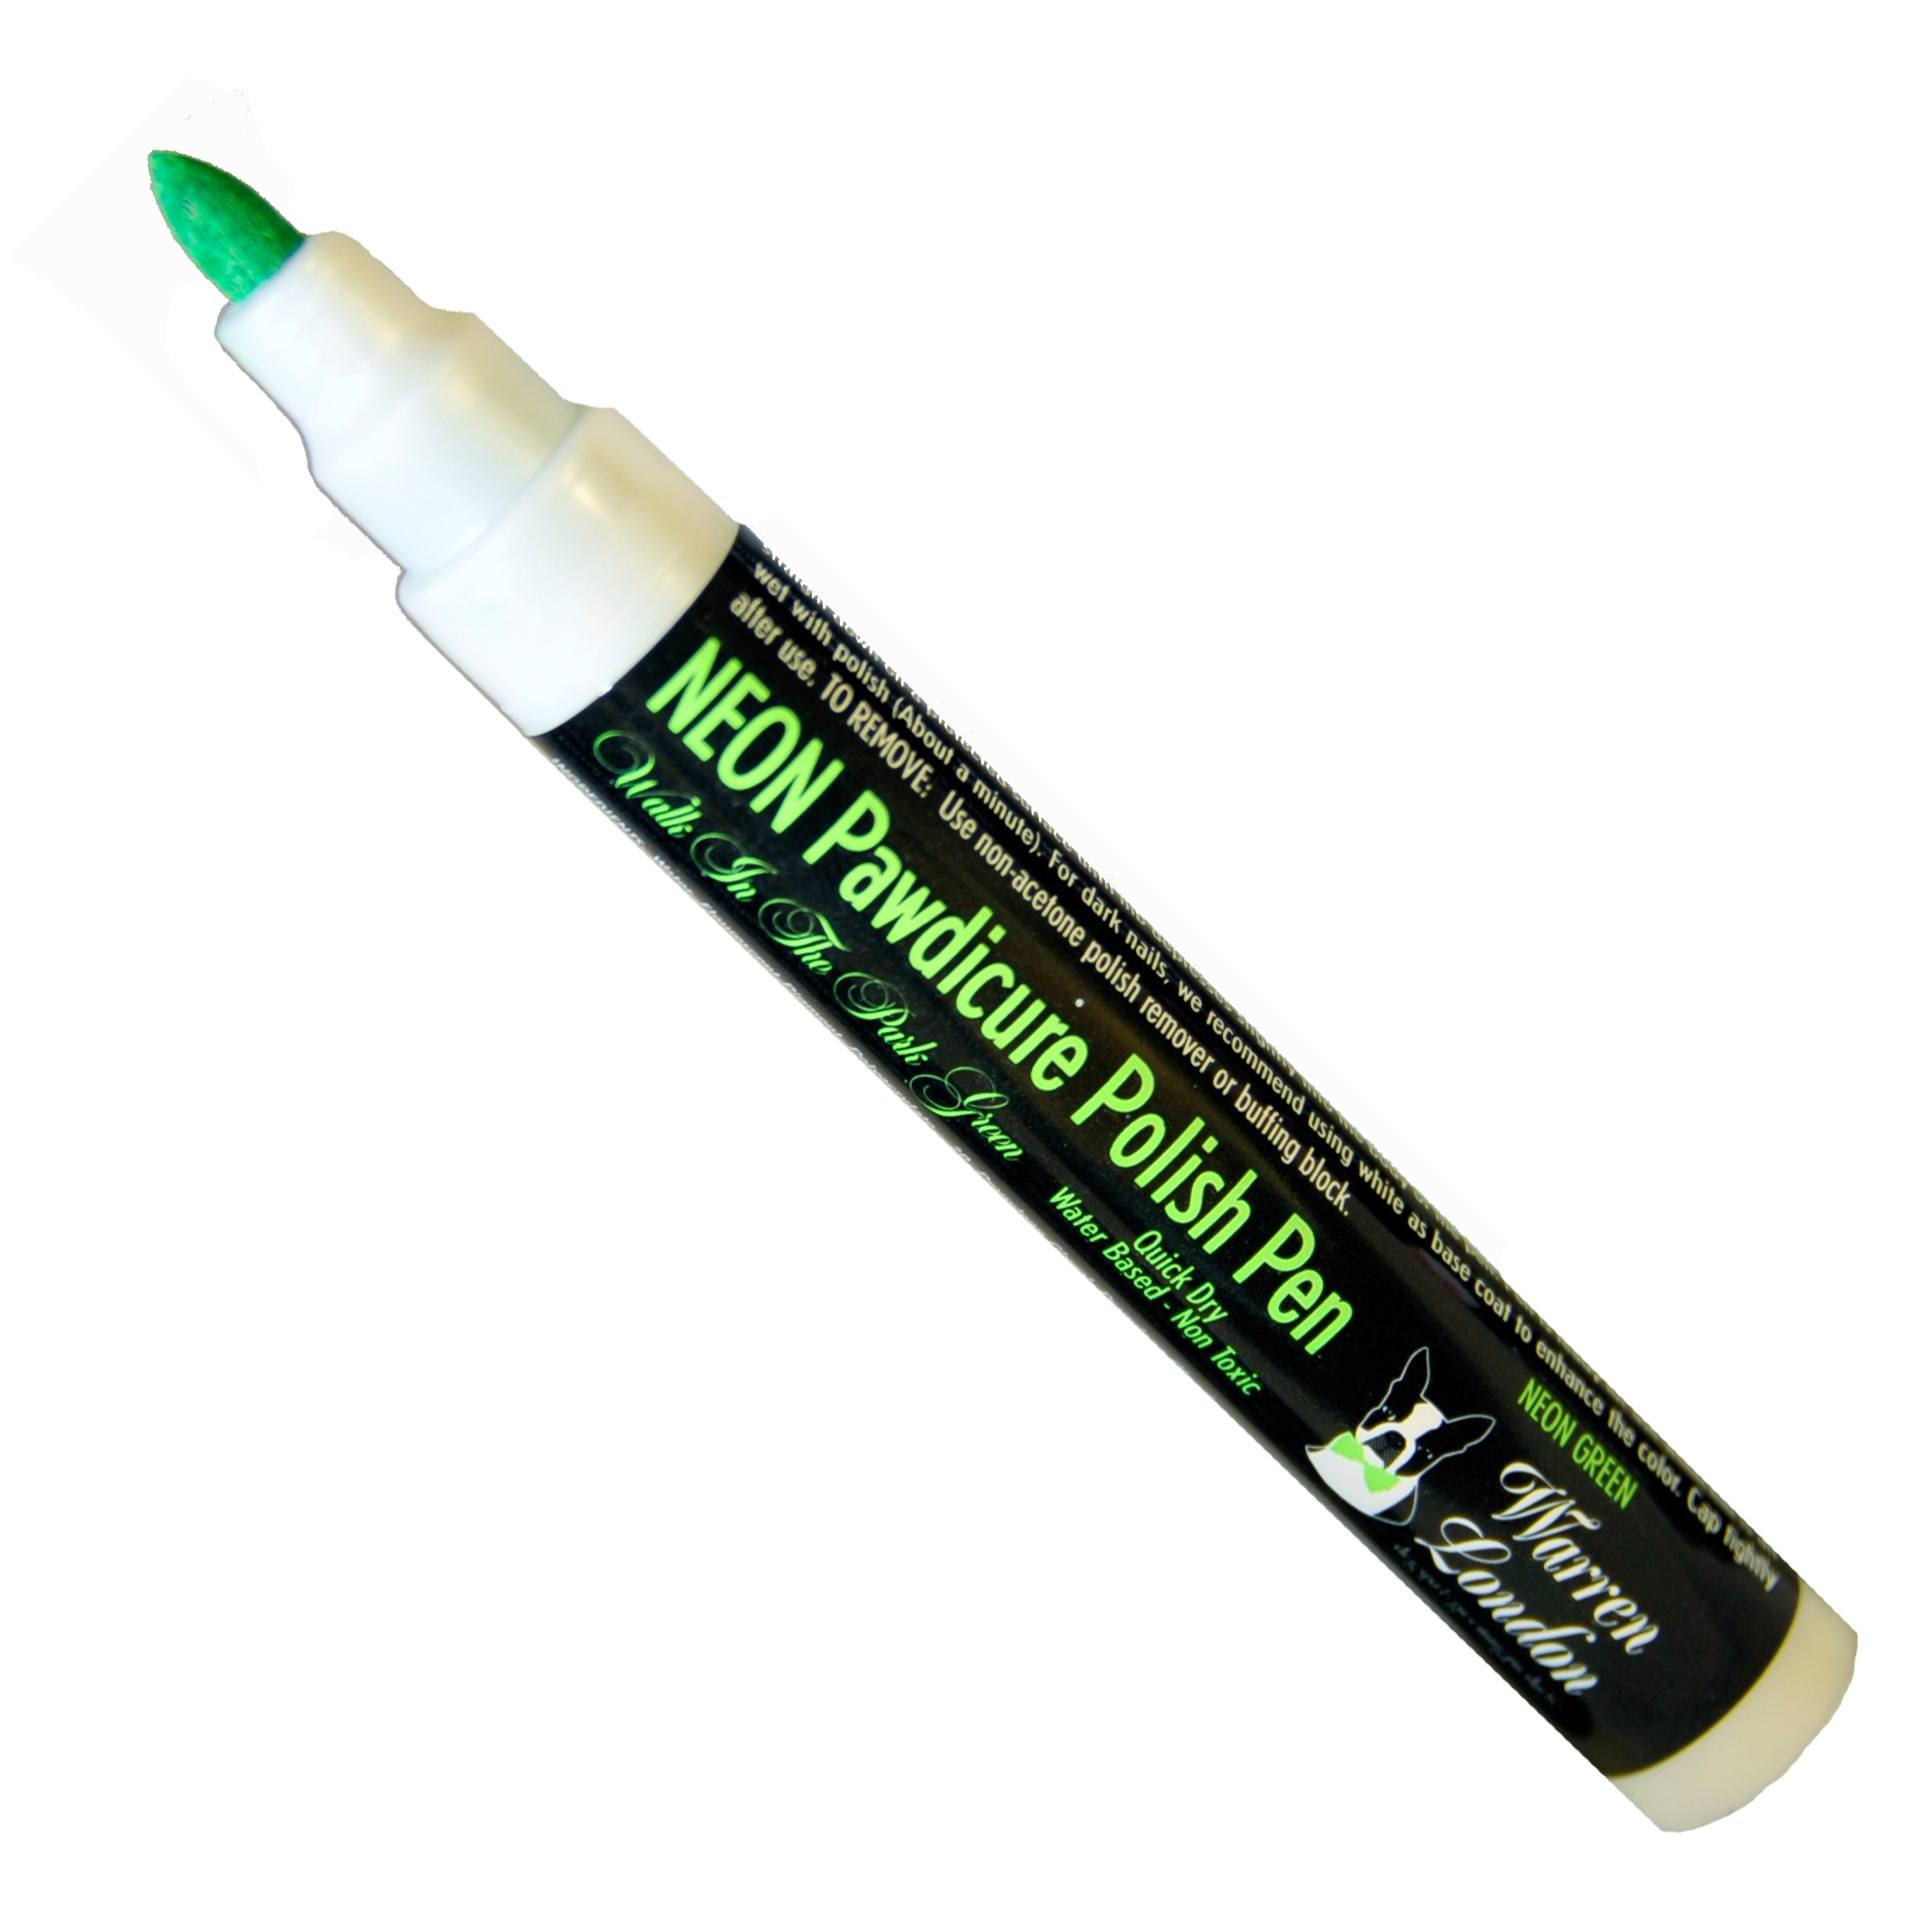 Pawdicure Polish Pens - Choose From 13 Colors! - Dog Nail Polish Dog Nail Polish Warren London Neon Green 